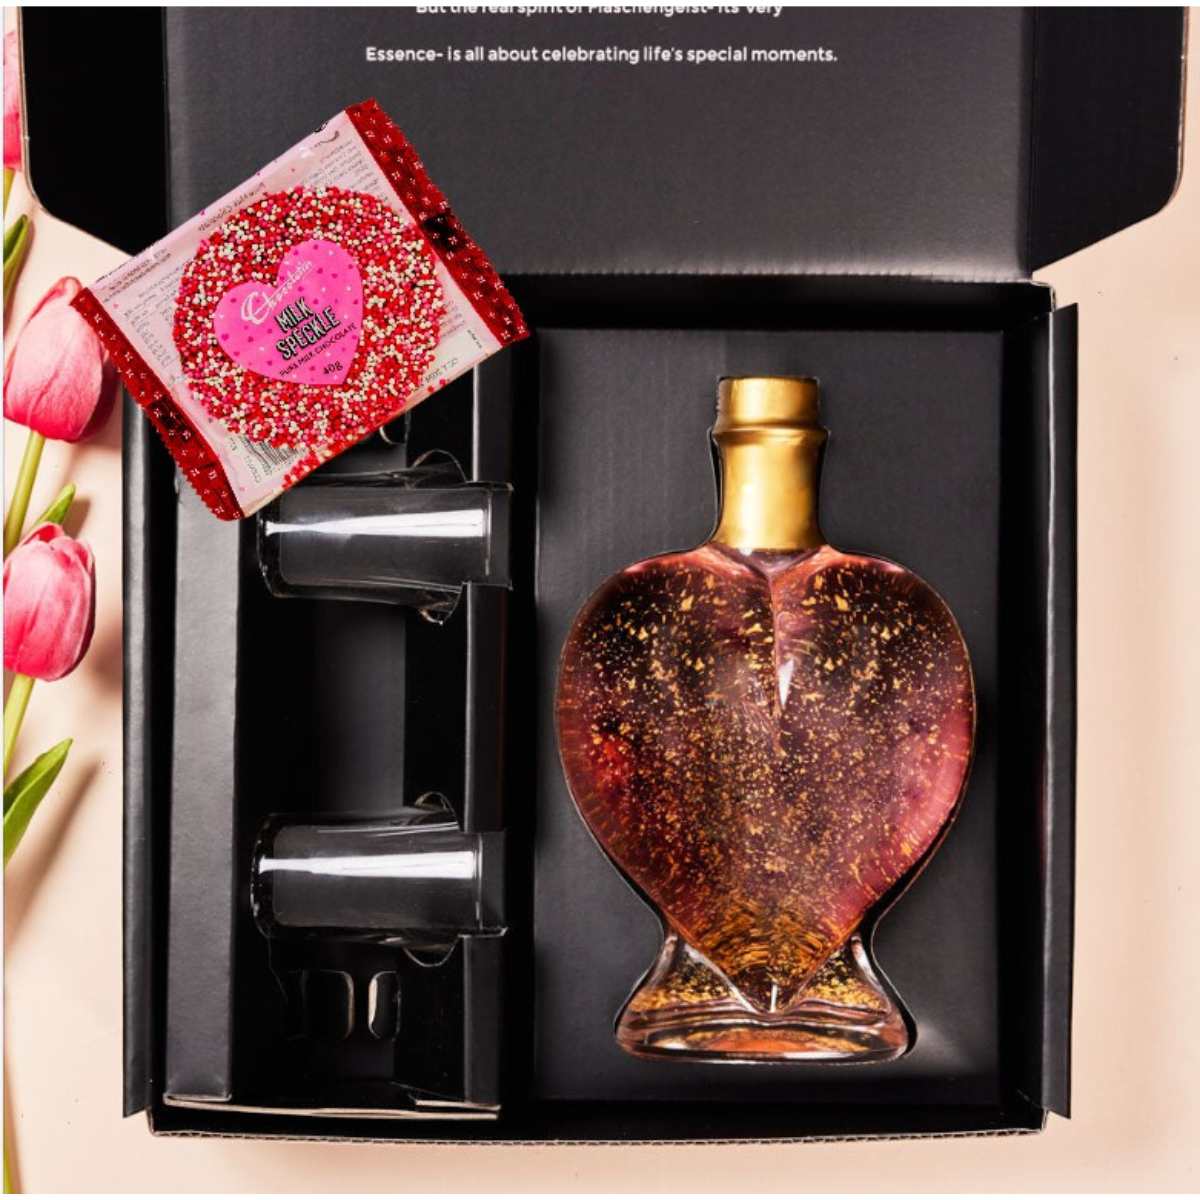 Love Heart Bottle - Raspberry Liqueur 24ct Gold Flakes and Freckle Choc - Gift Box